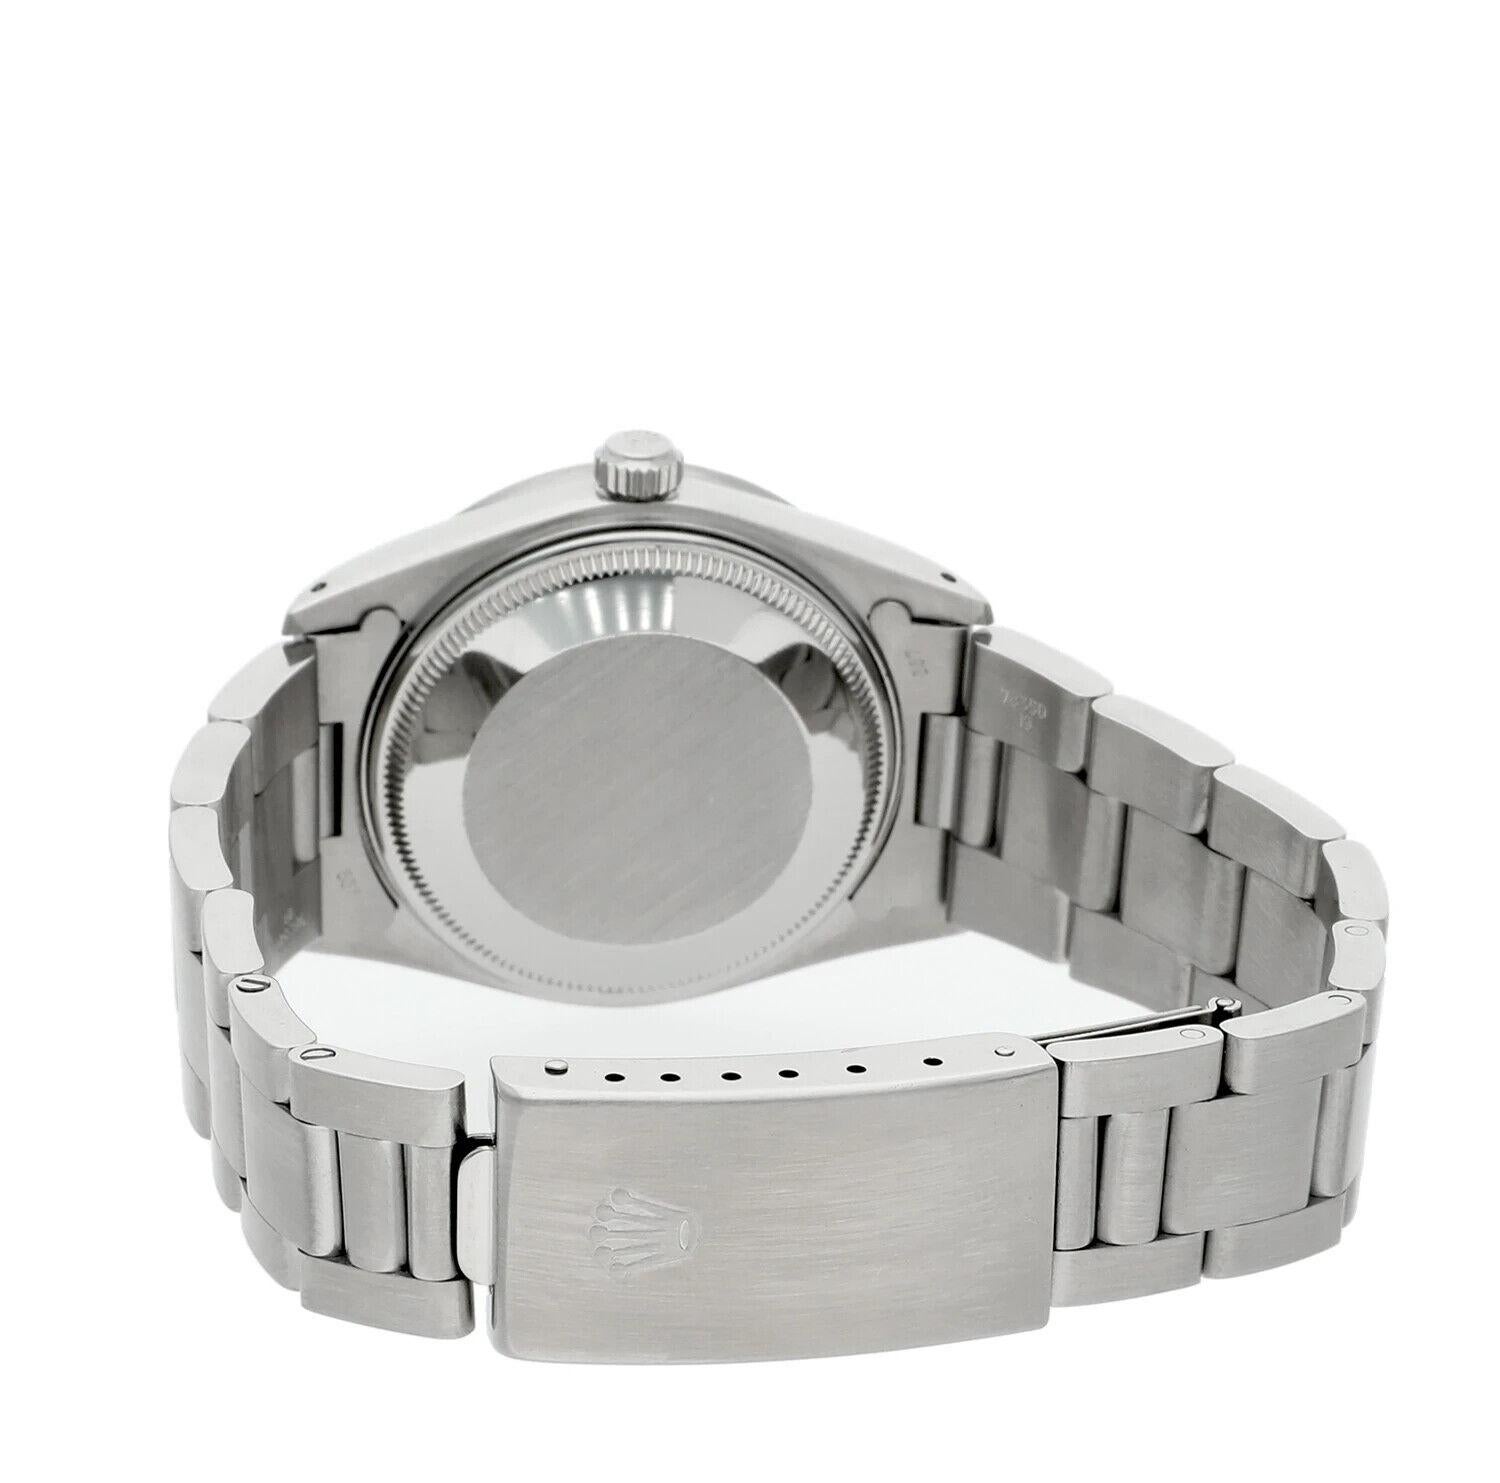 Women's Unisex Rolex Date Stainless Steel Watch Oyster White Roman Dial 15010 Circa 1988 For Sale